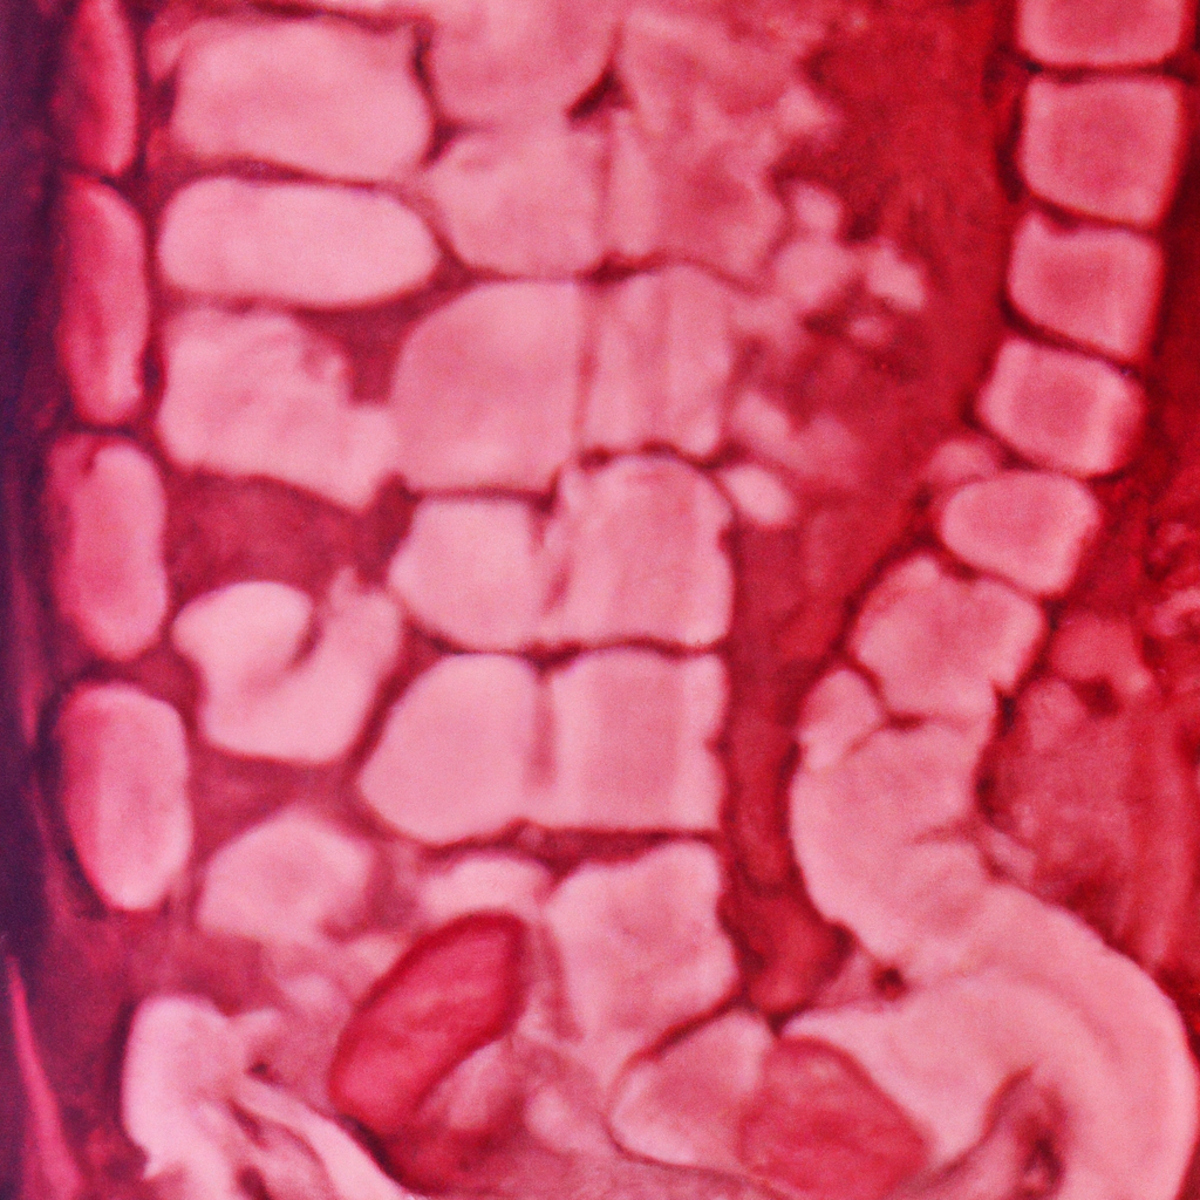 Enlarged, irregular gastric folds with inflamed, rough texture in shades of red and pink, representing Menetrier's Disease.